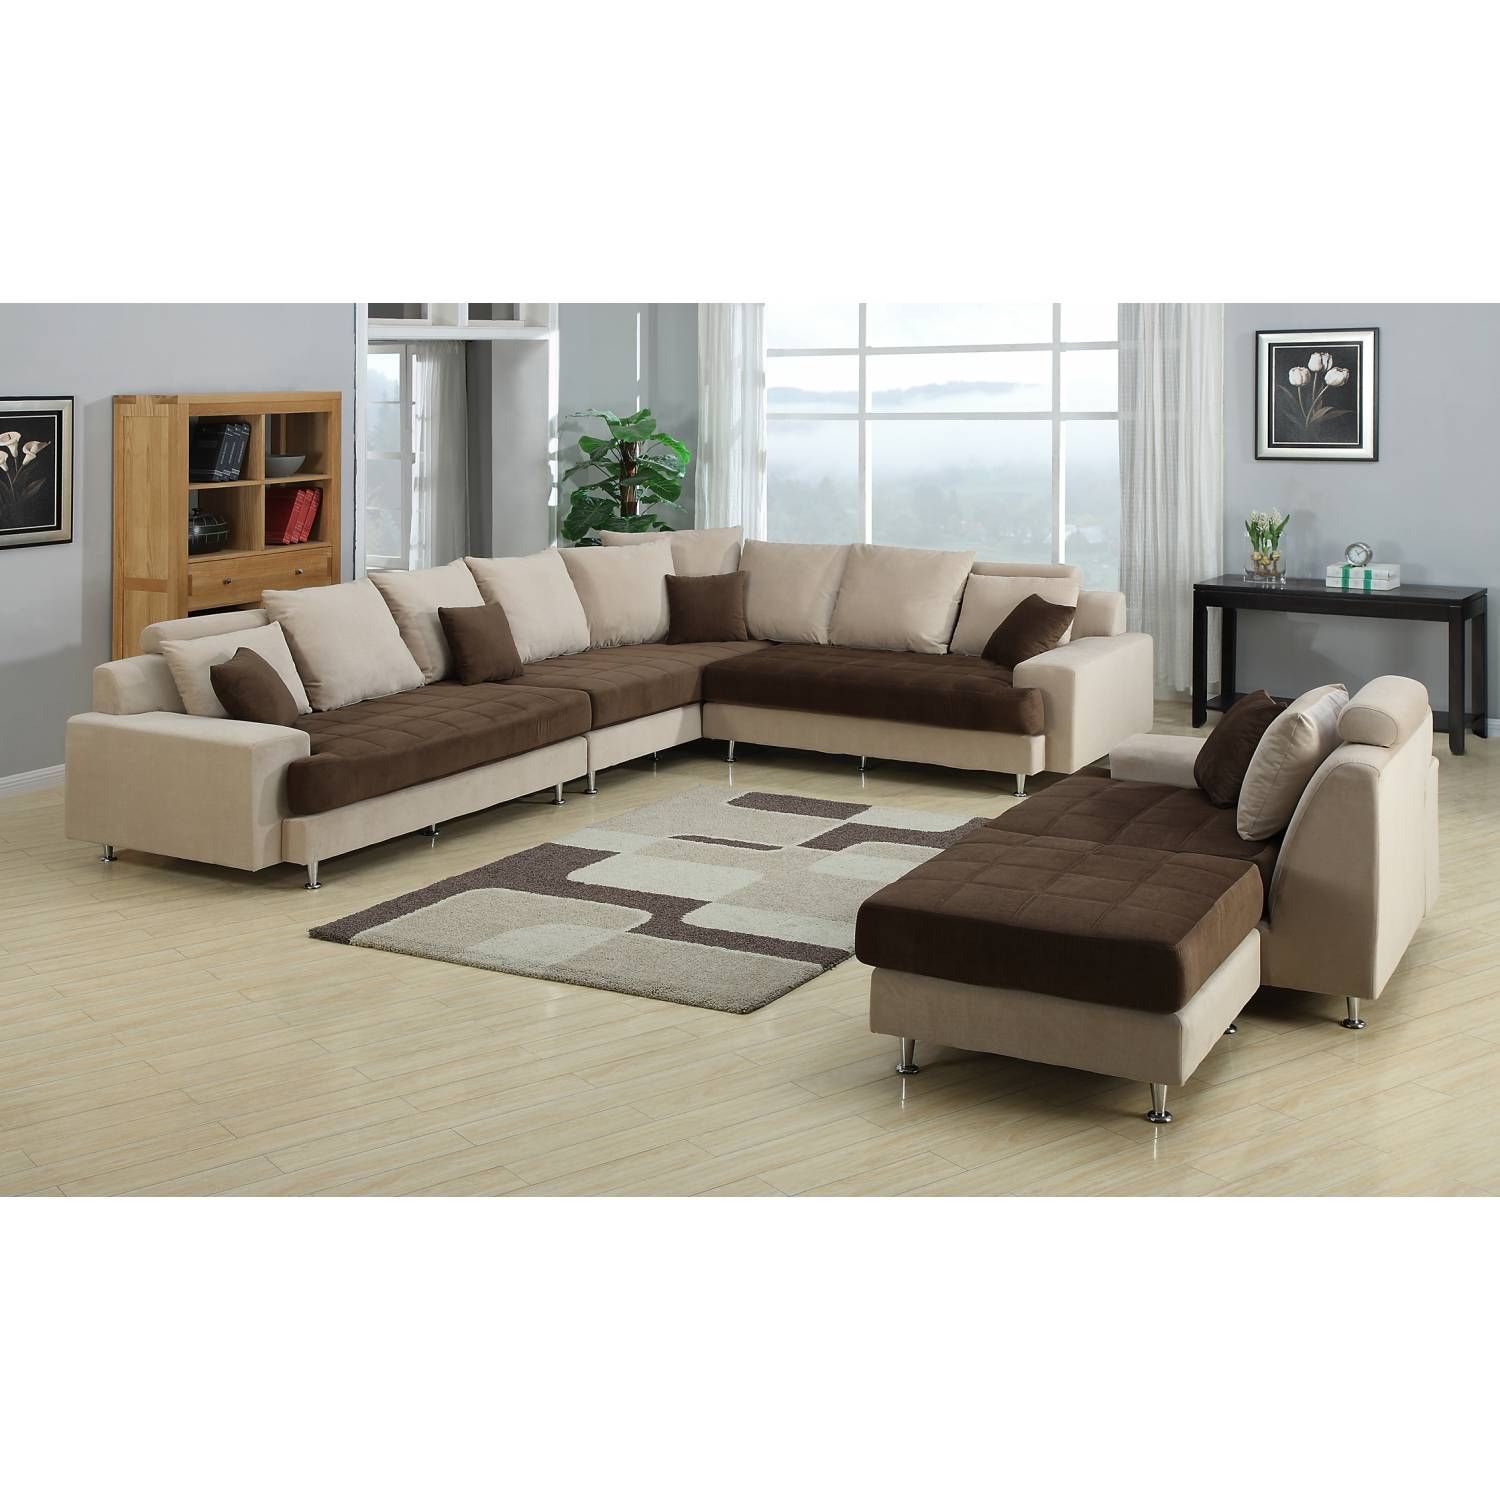 Sectional Sofa With Ottoman – Foter Inside 2 Tone Chocolate Microfiber Sofas (View 14 of 15)